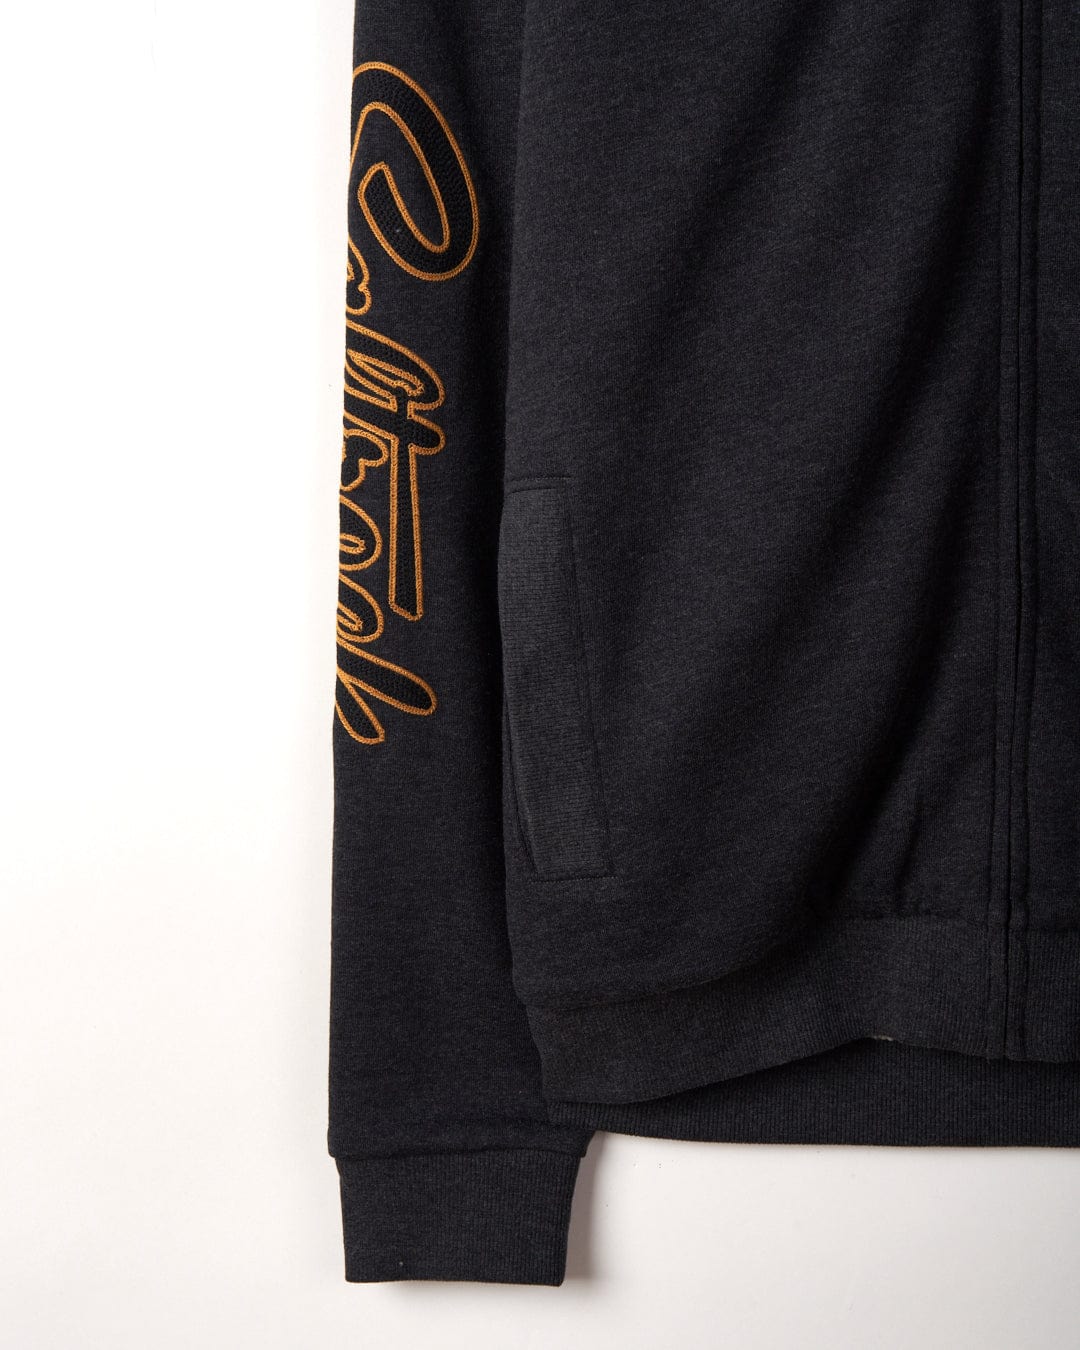 Close-up of a grey Saltrock Vegas Script Mens Borg Lined Zip Hoodie with an embroidered chain stitch orange cursive logo on the sleeve, displayed against a white background.